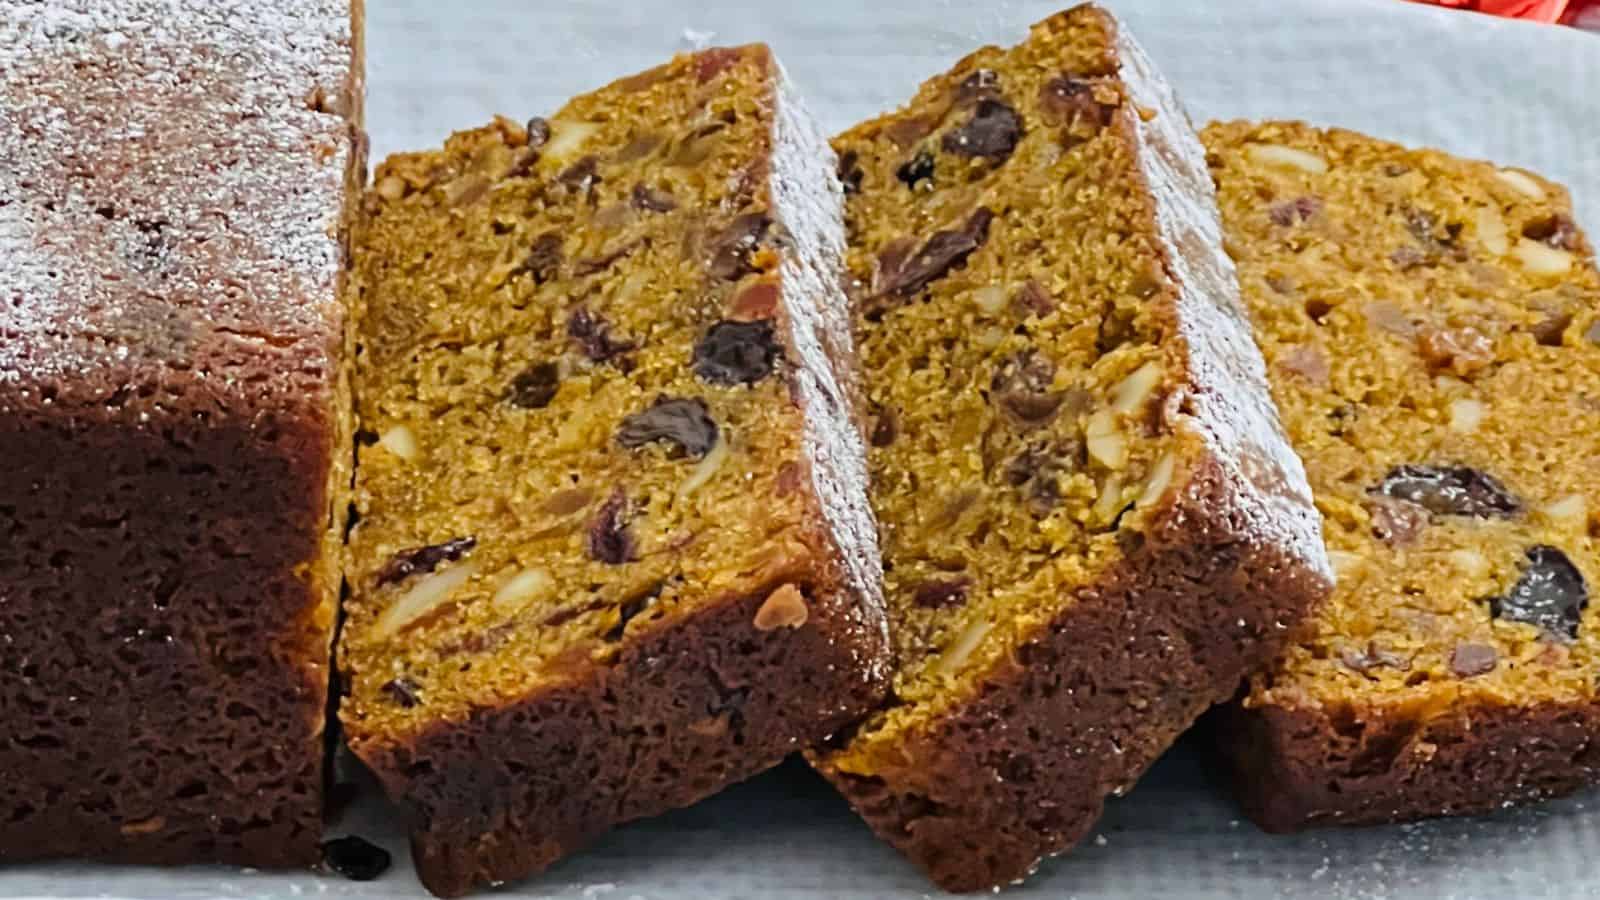 A loaf of fruitcake partially sliced, revealing a dense, moist interior with visible nuts and dried fruits.